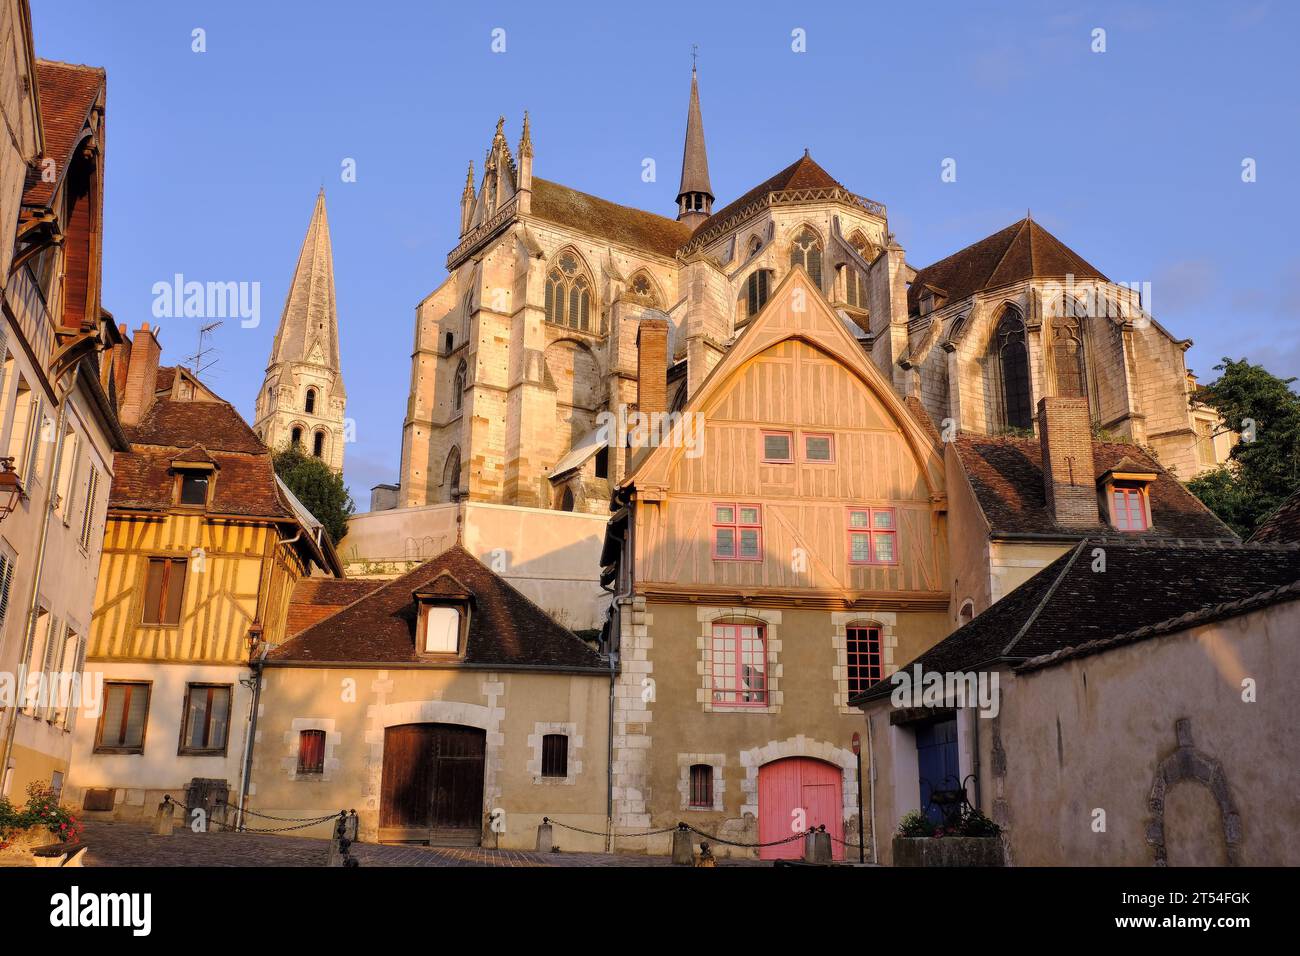 Auxerre: Abbey Saint-Germain and half timbered buildings glowing orange soon after sunrise in Place du Coche d’Eau, Auxerre, Burgundy Stock Photo